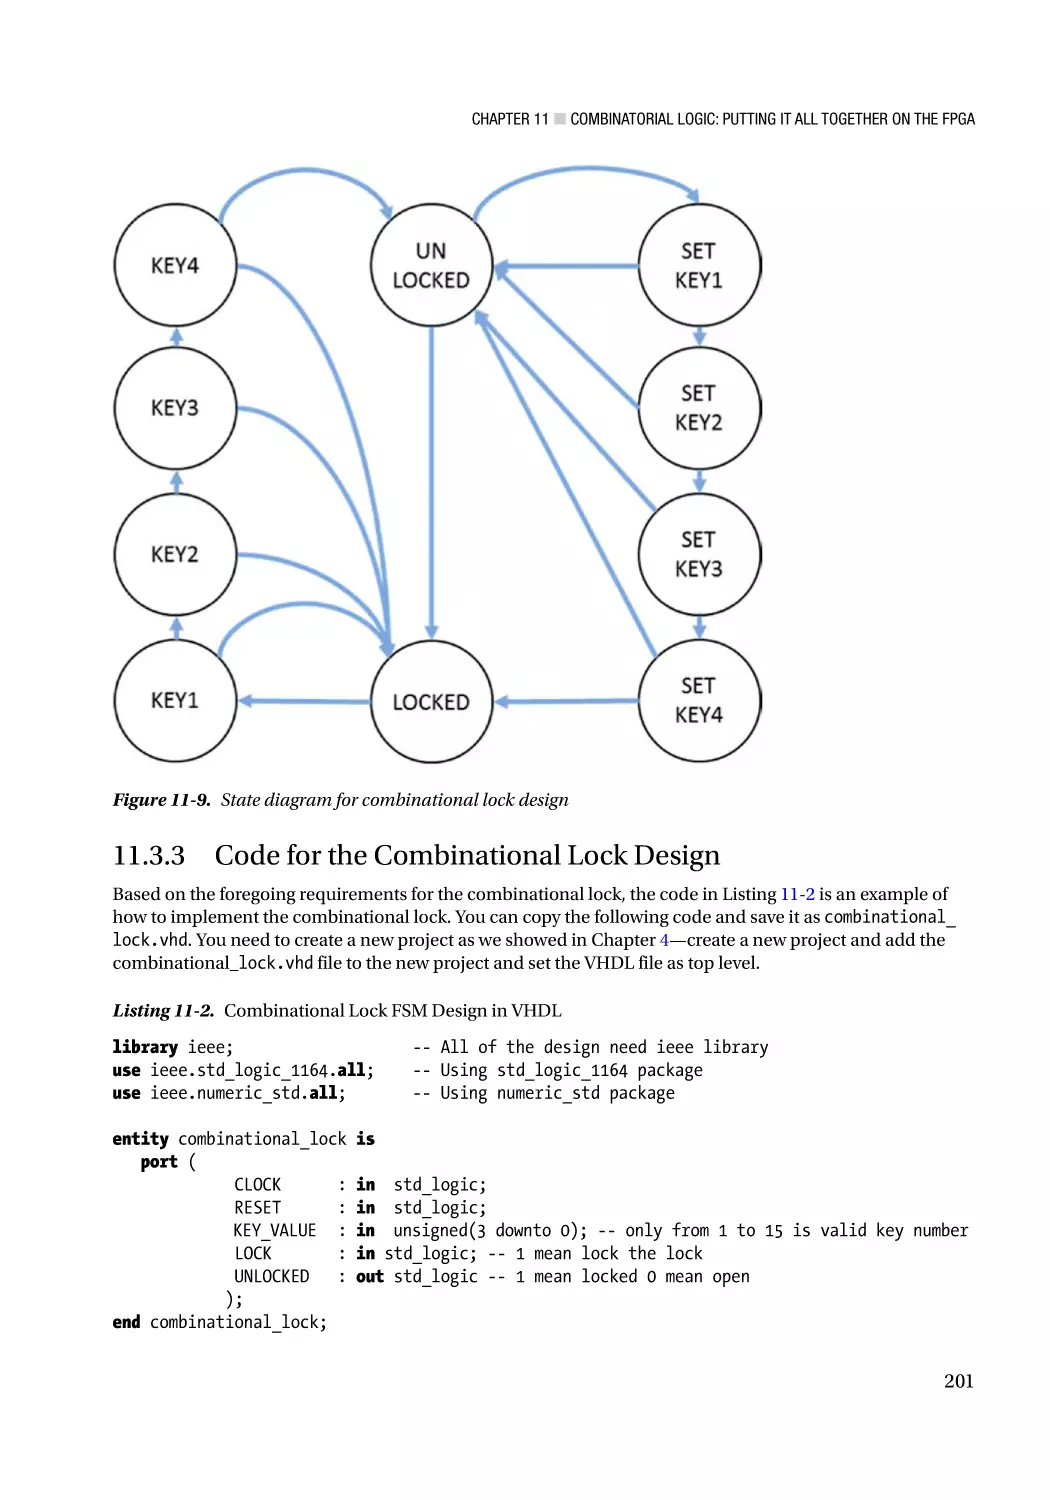 11.3.3 Code for the Combinational Lock Design